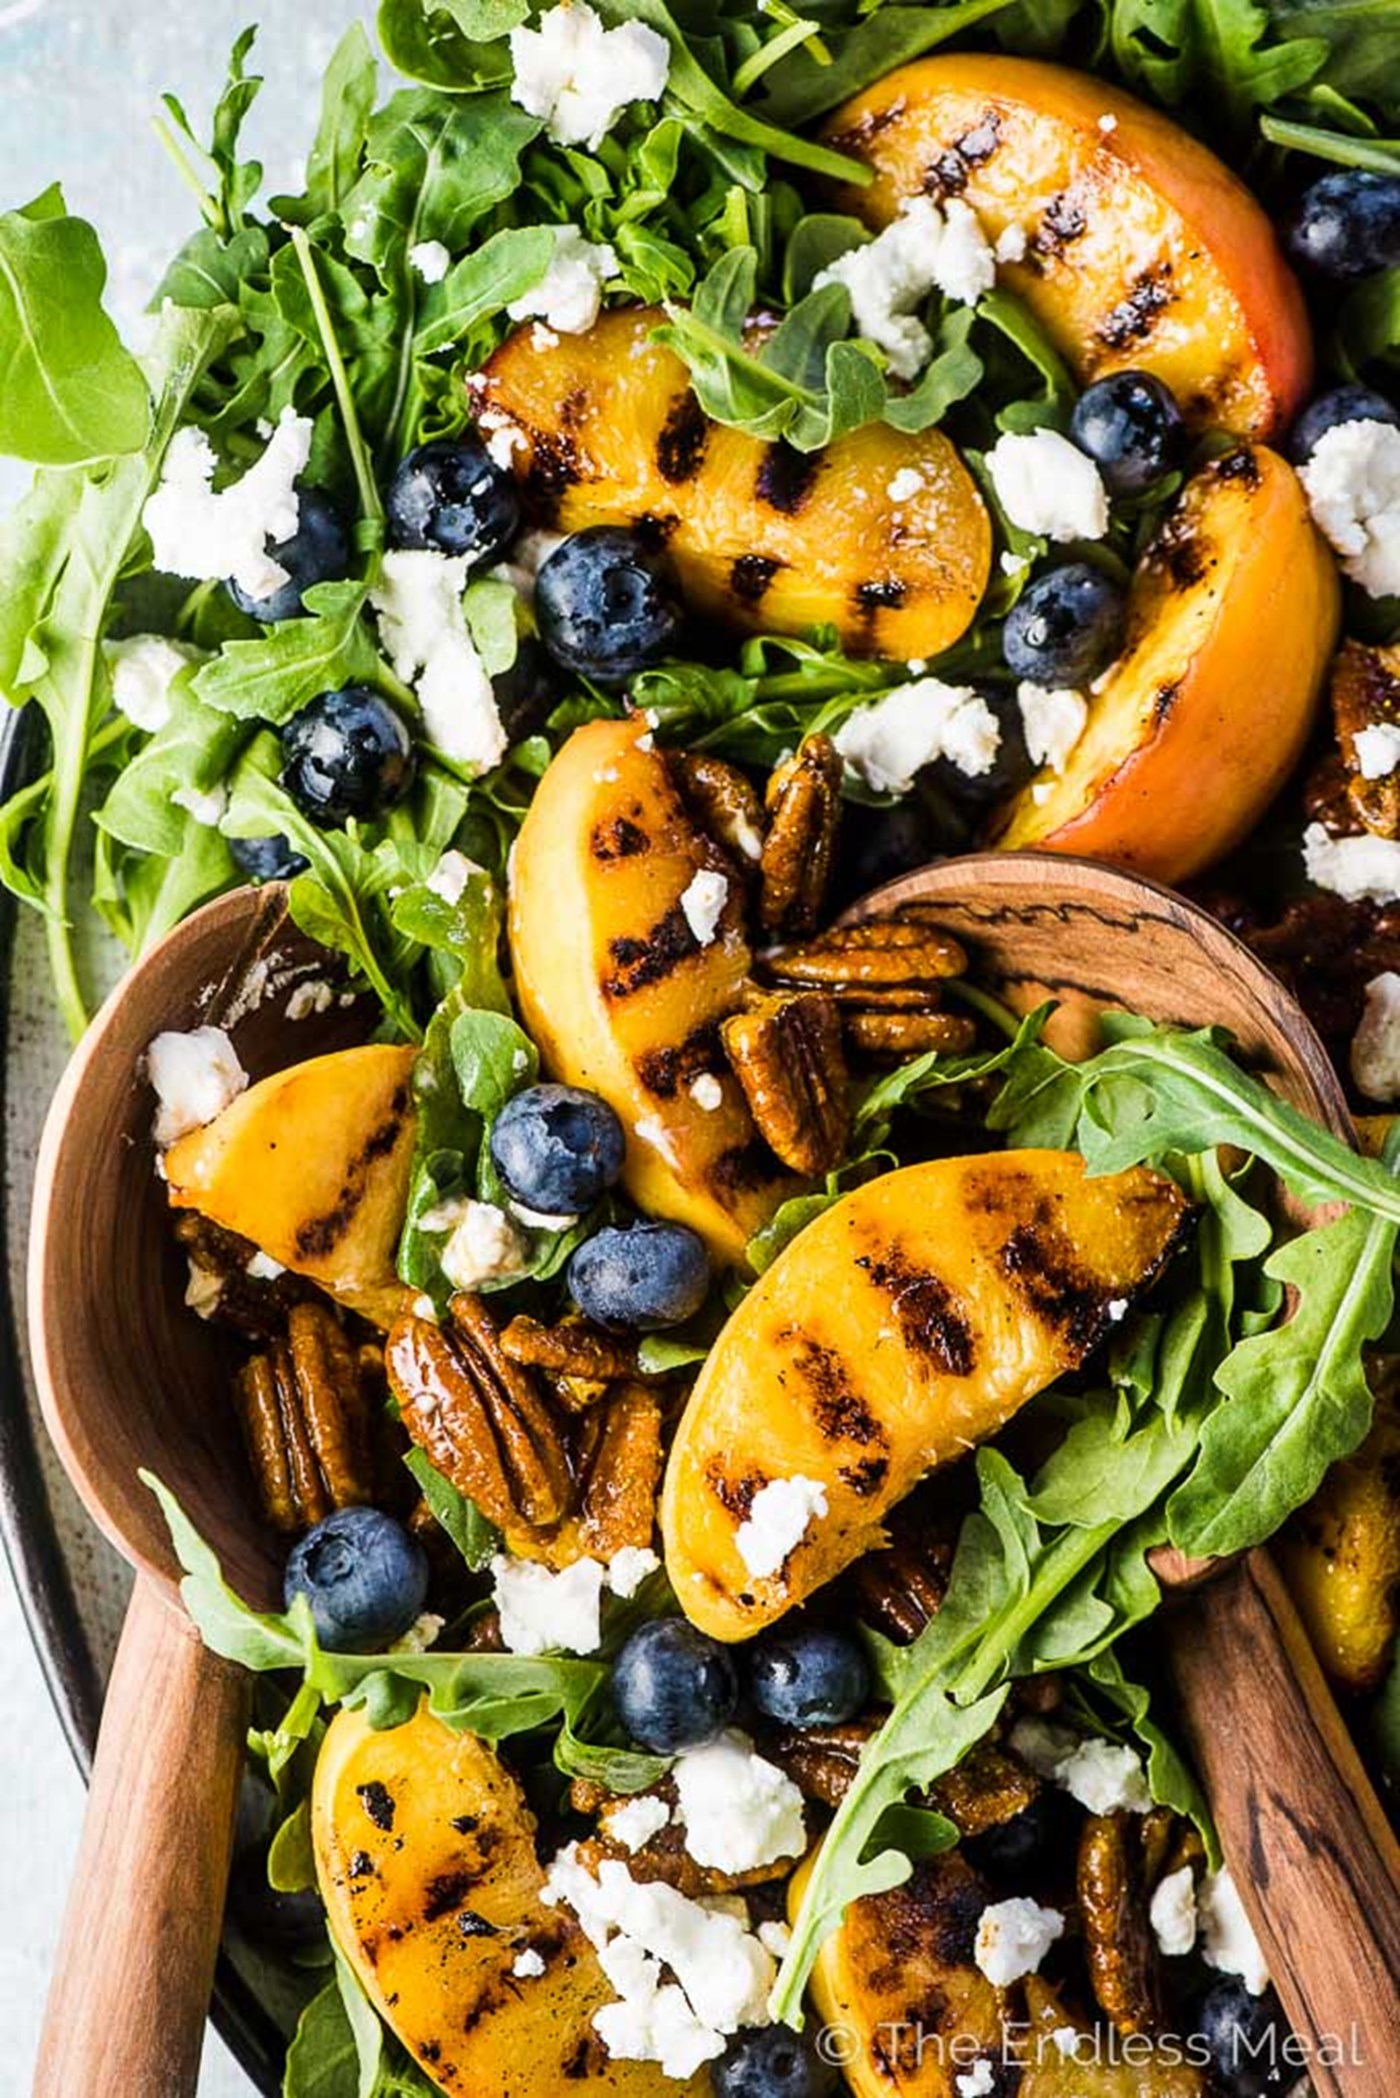 Grilled Peach Salad (Credit: The Endless Meal)